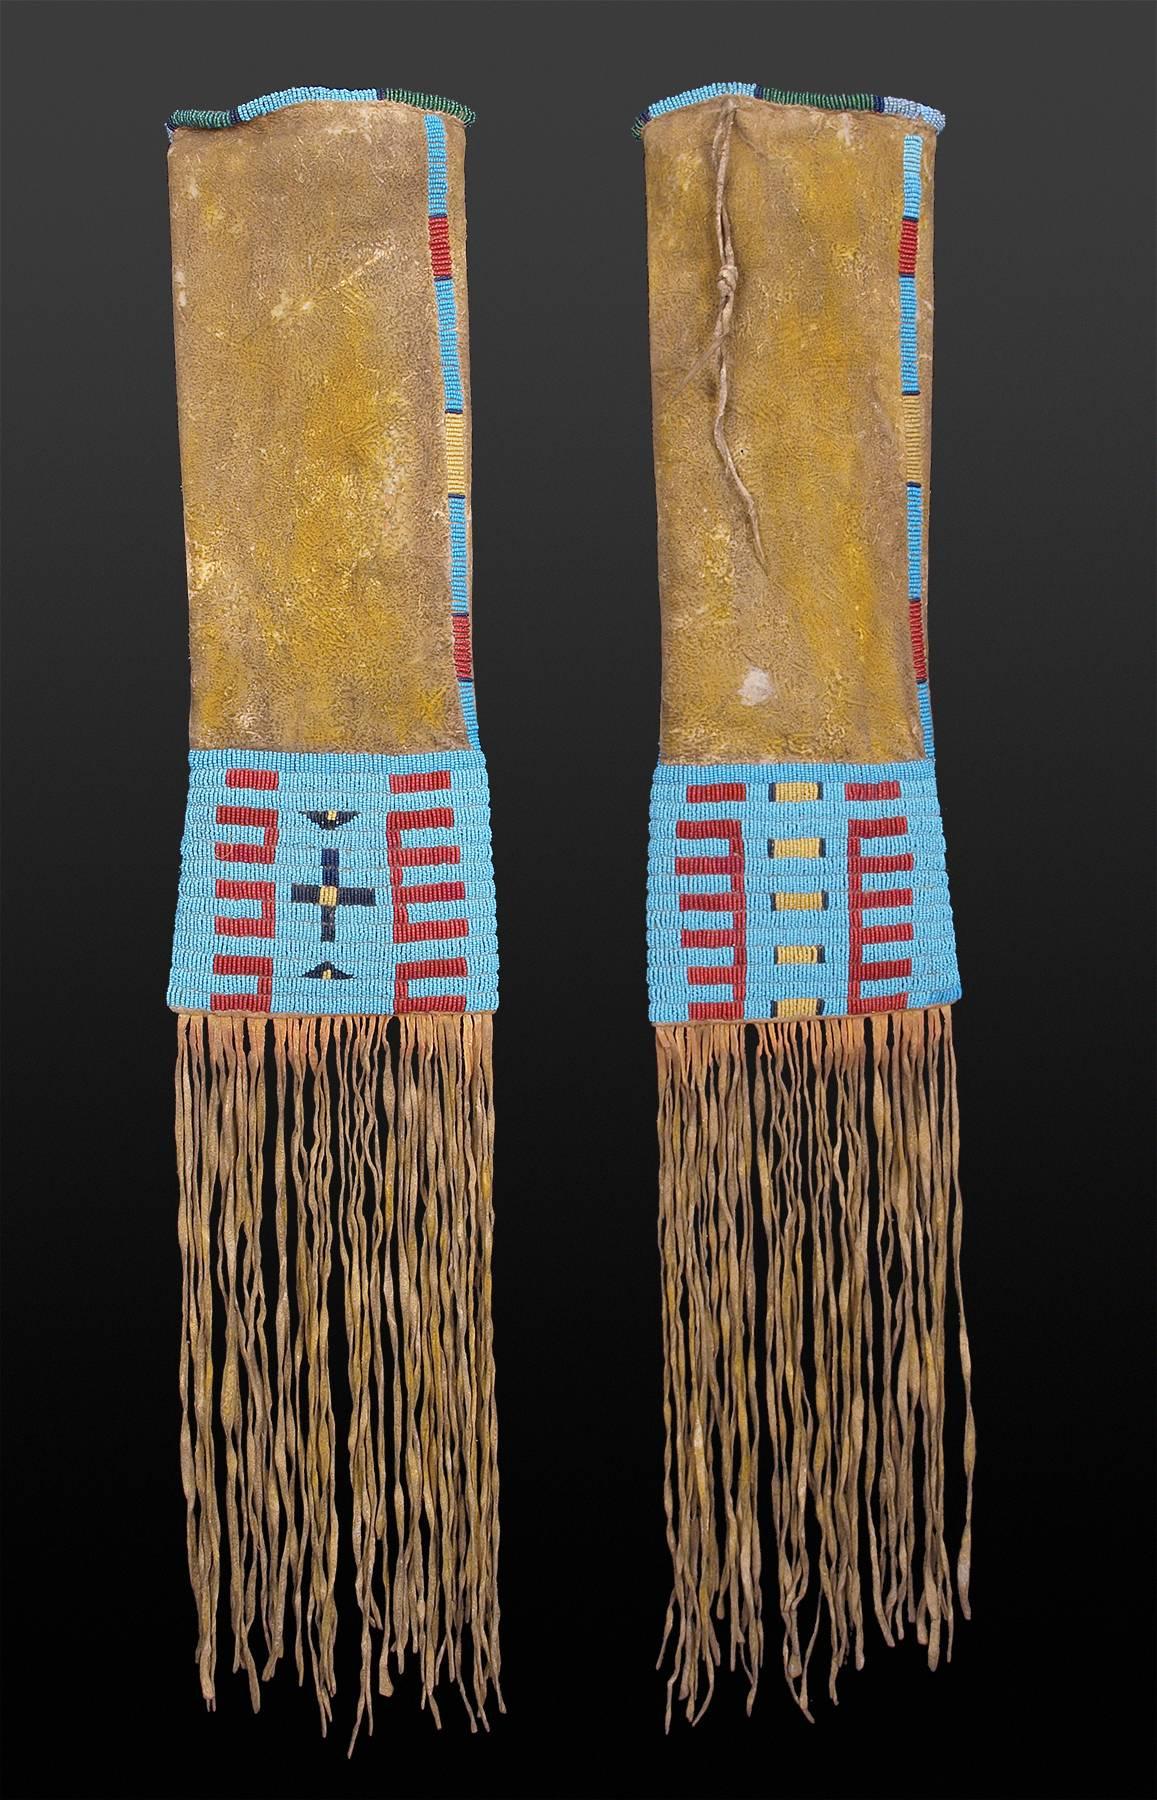 Classic period Sioux (North American Indian) pipe bag/tobacco bag dates to circa 1850-1875. It is constructed of native tanned hide, sinew-sewn and beaded in traditional Sioux colors and design and rubbed with yellow ochre pigment. Custom wall mount